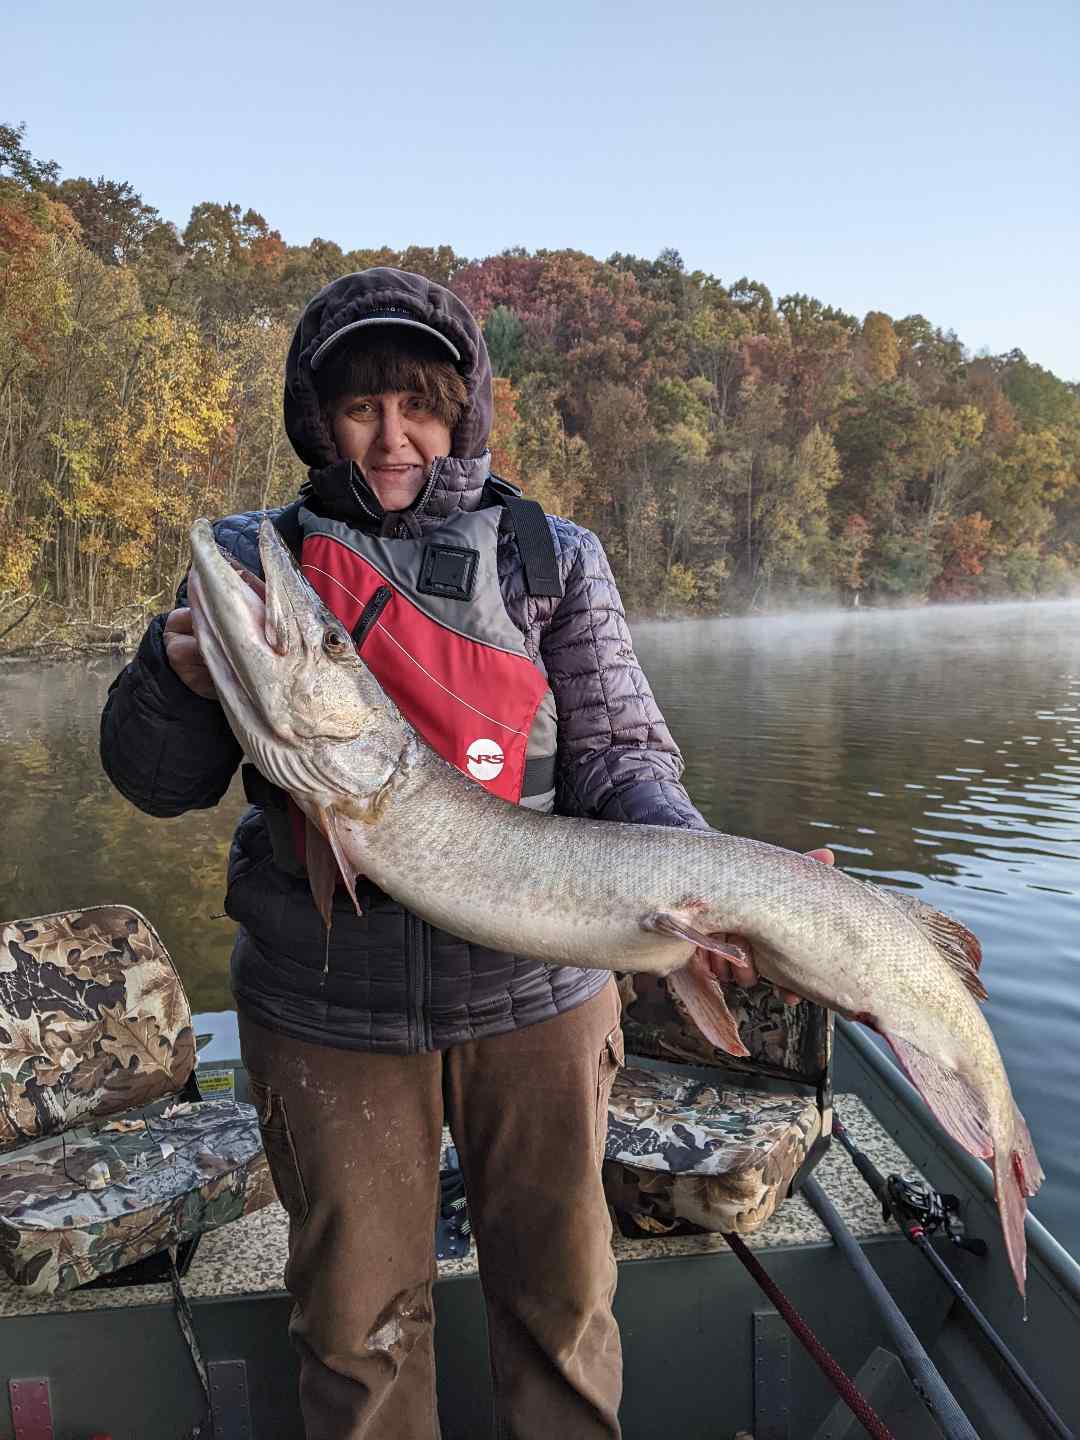 Ok to catch musky on bass rod without breaking it? - Other Fish